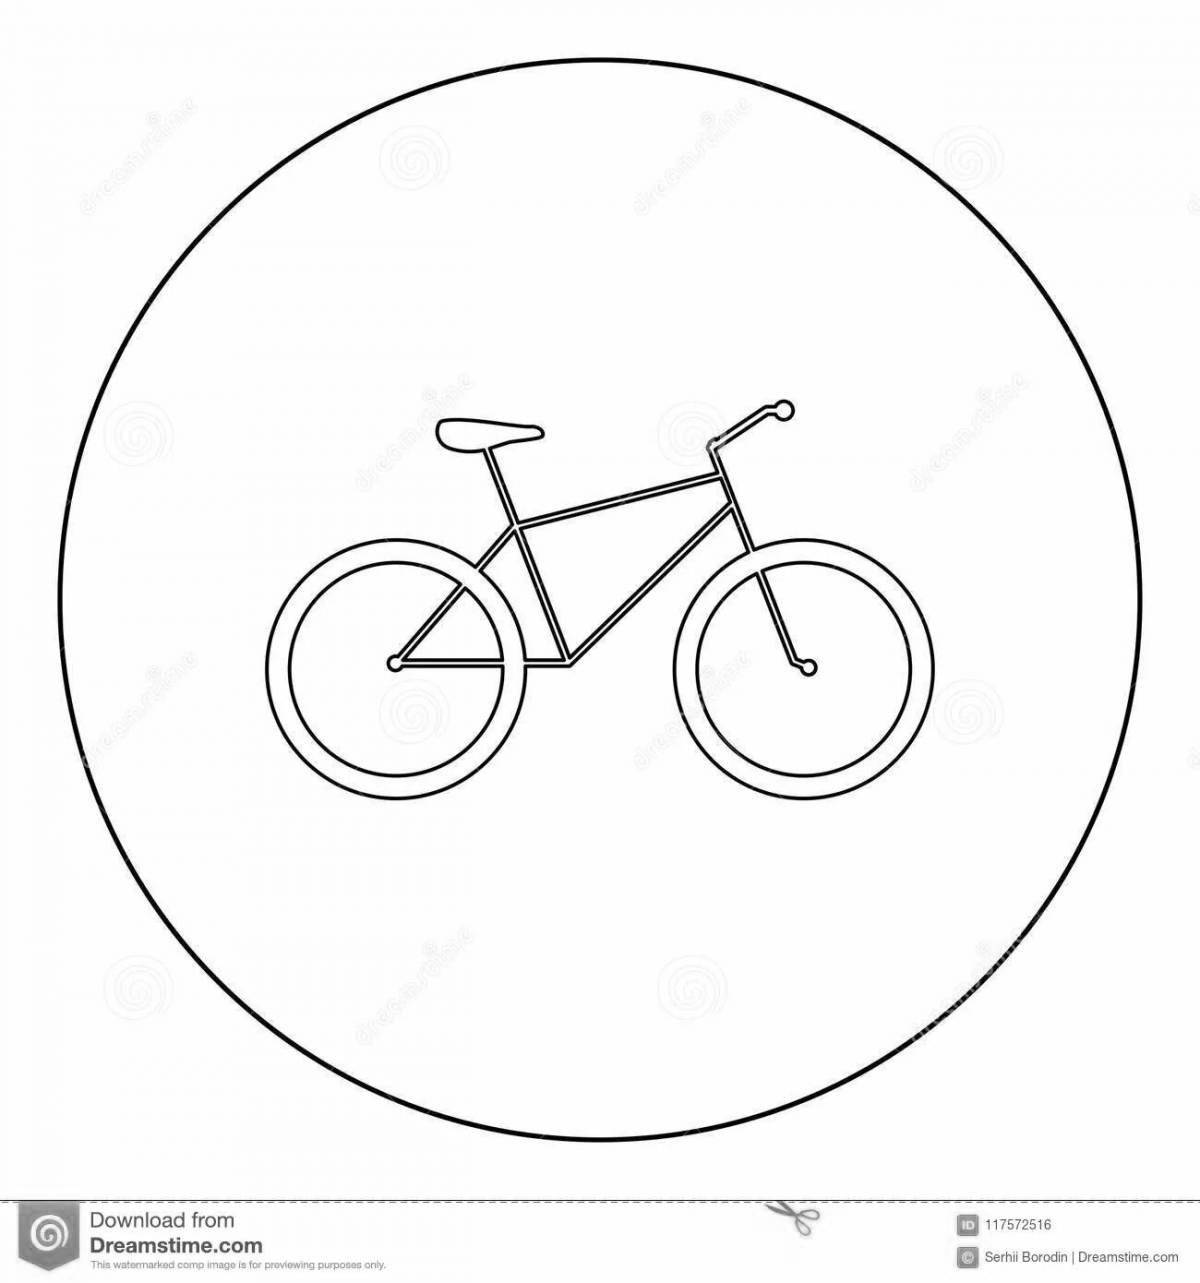 Exciting bike path road sign coloring page